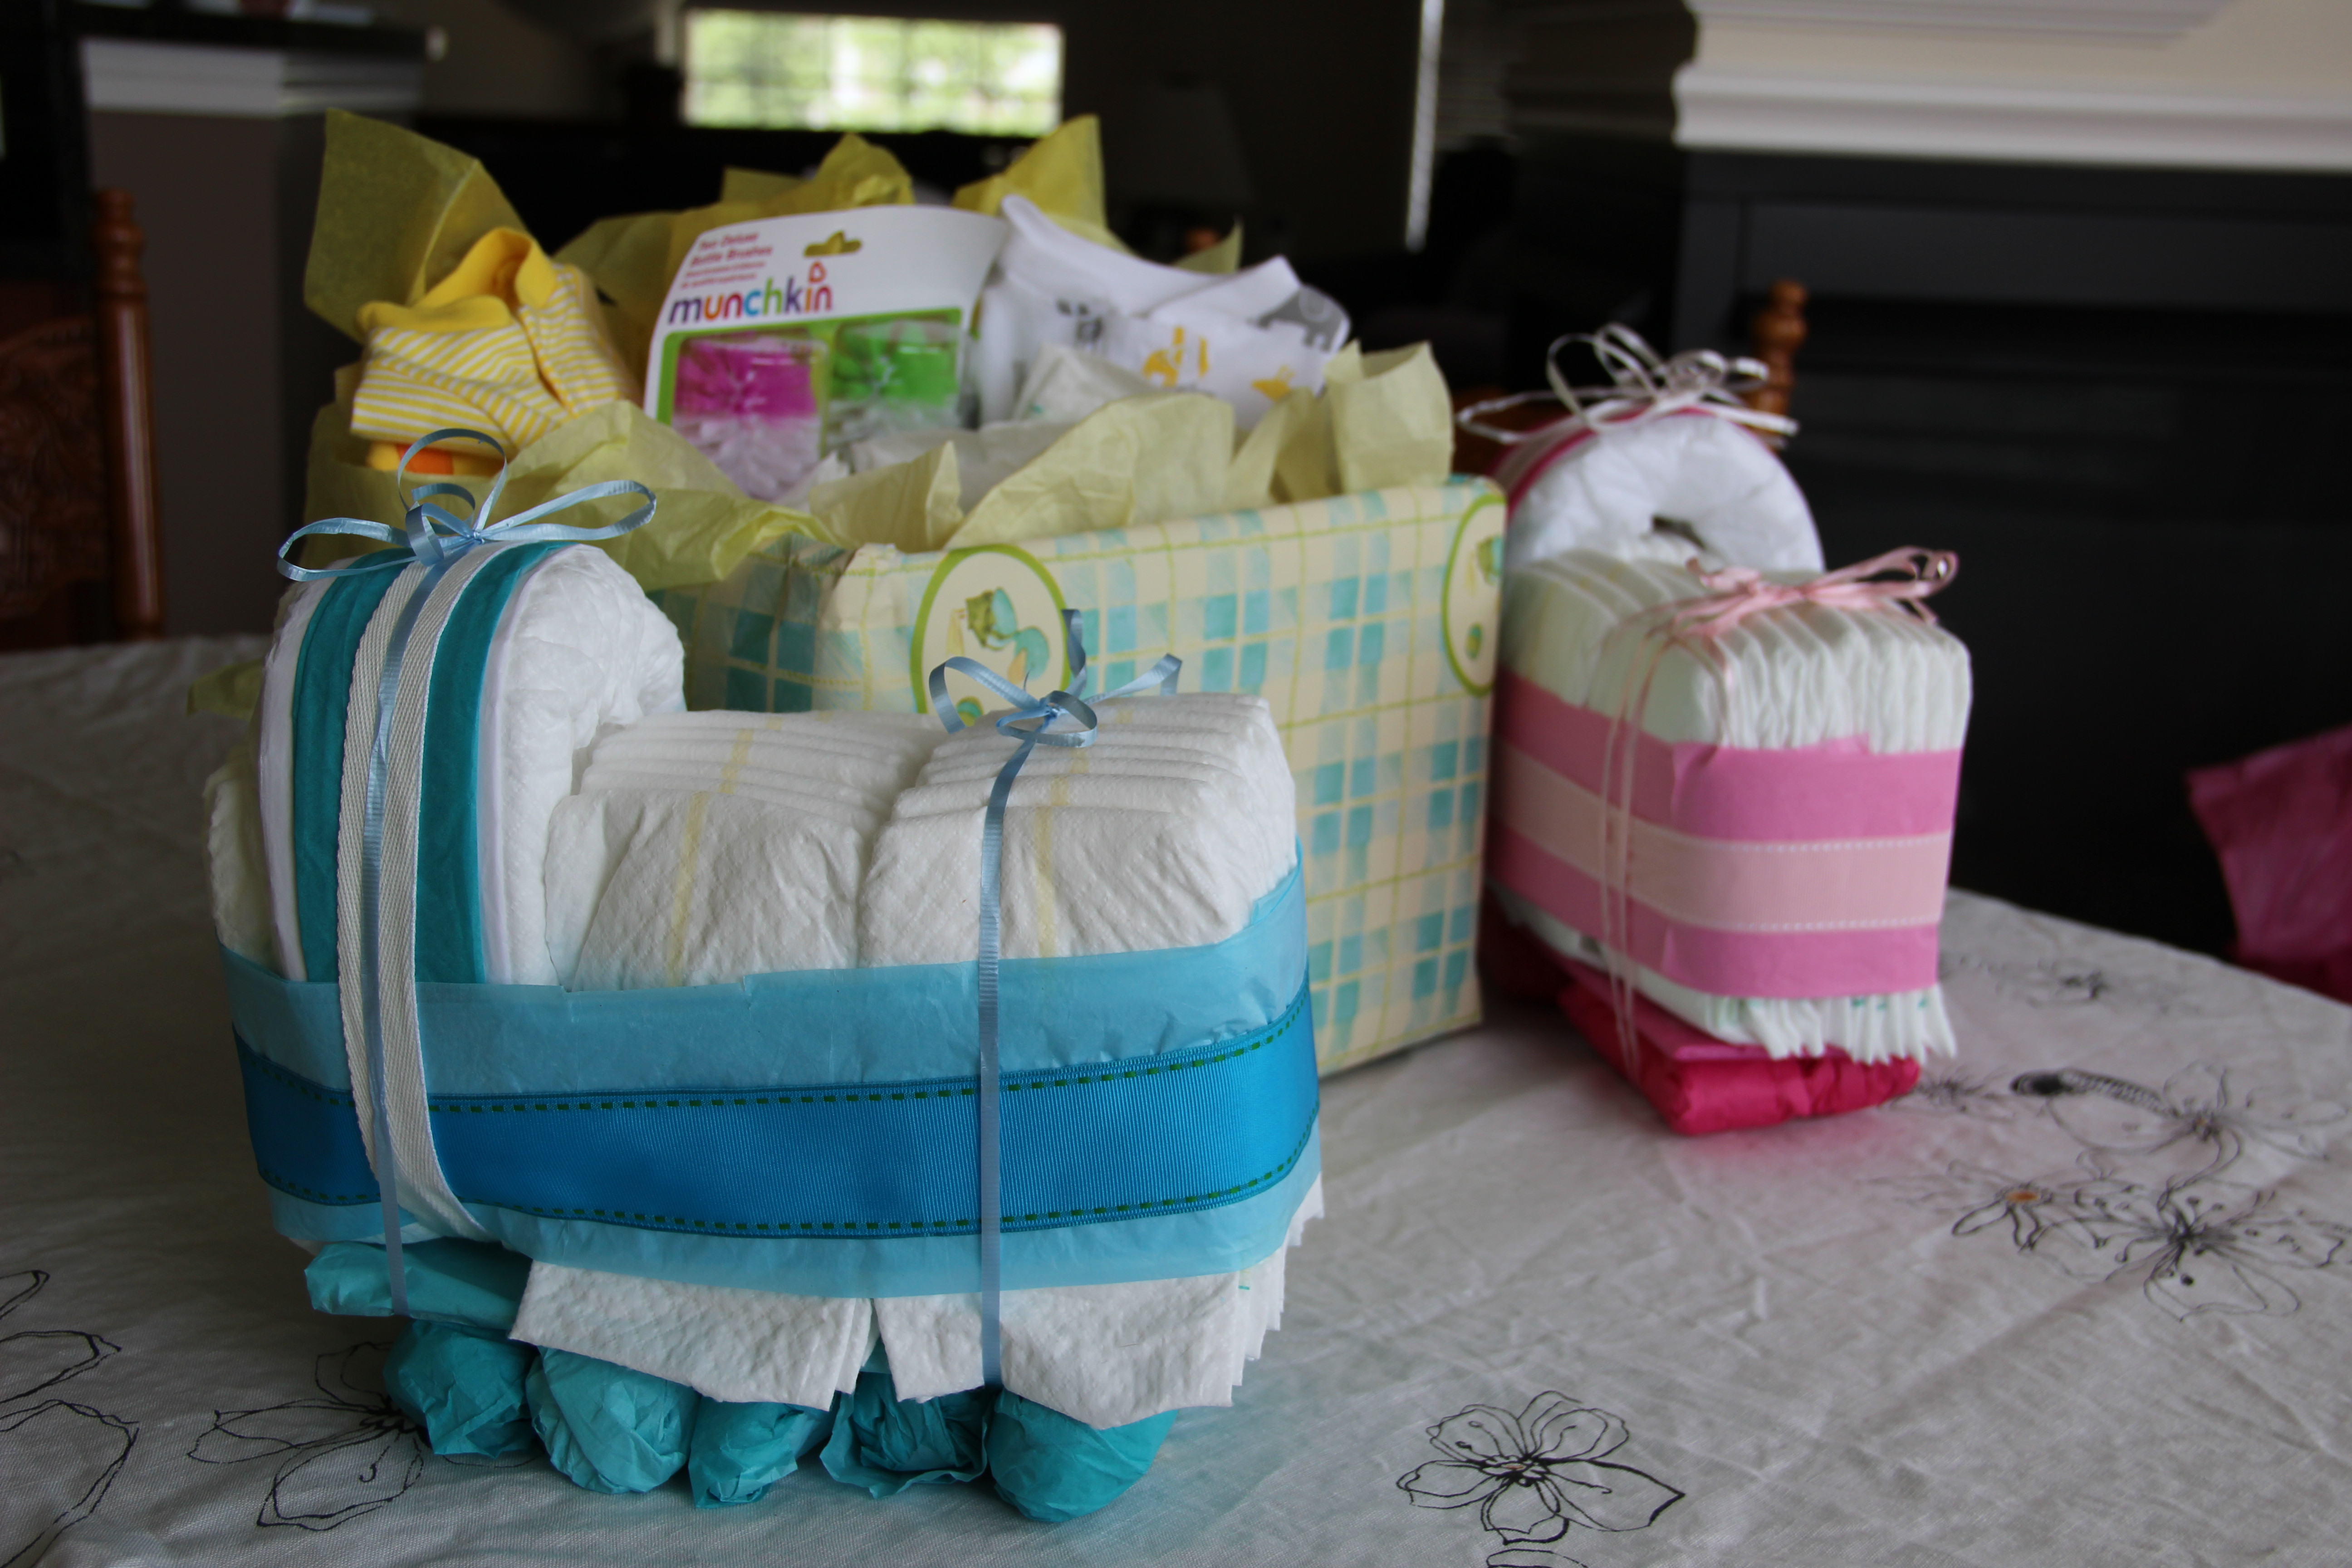 Baby Shower Gift Ideas For A Boy
 The Importance of Being Cleveland